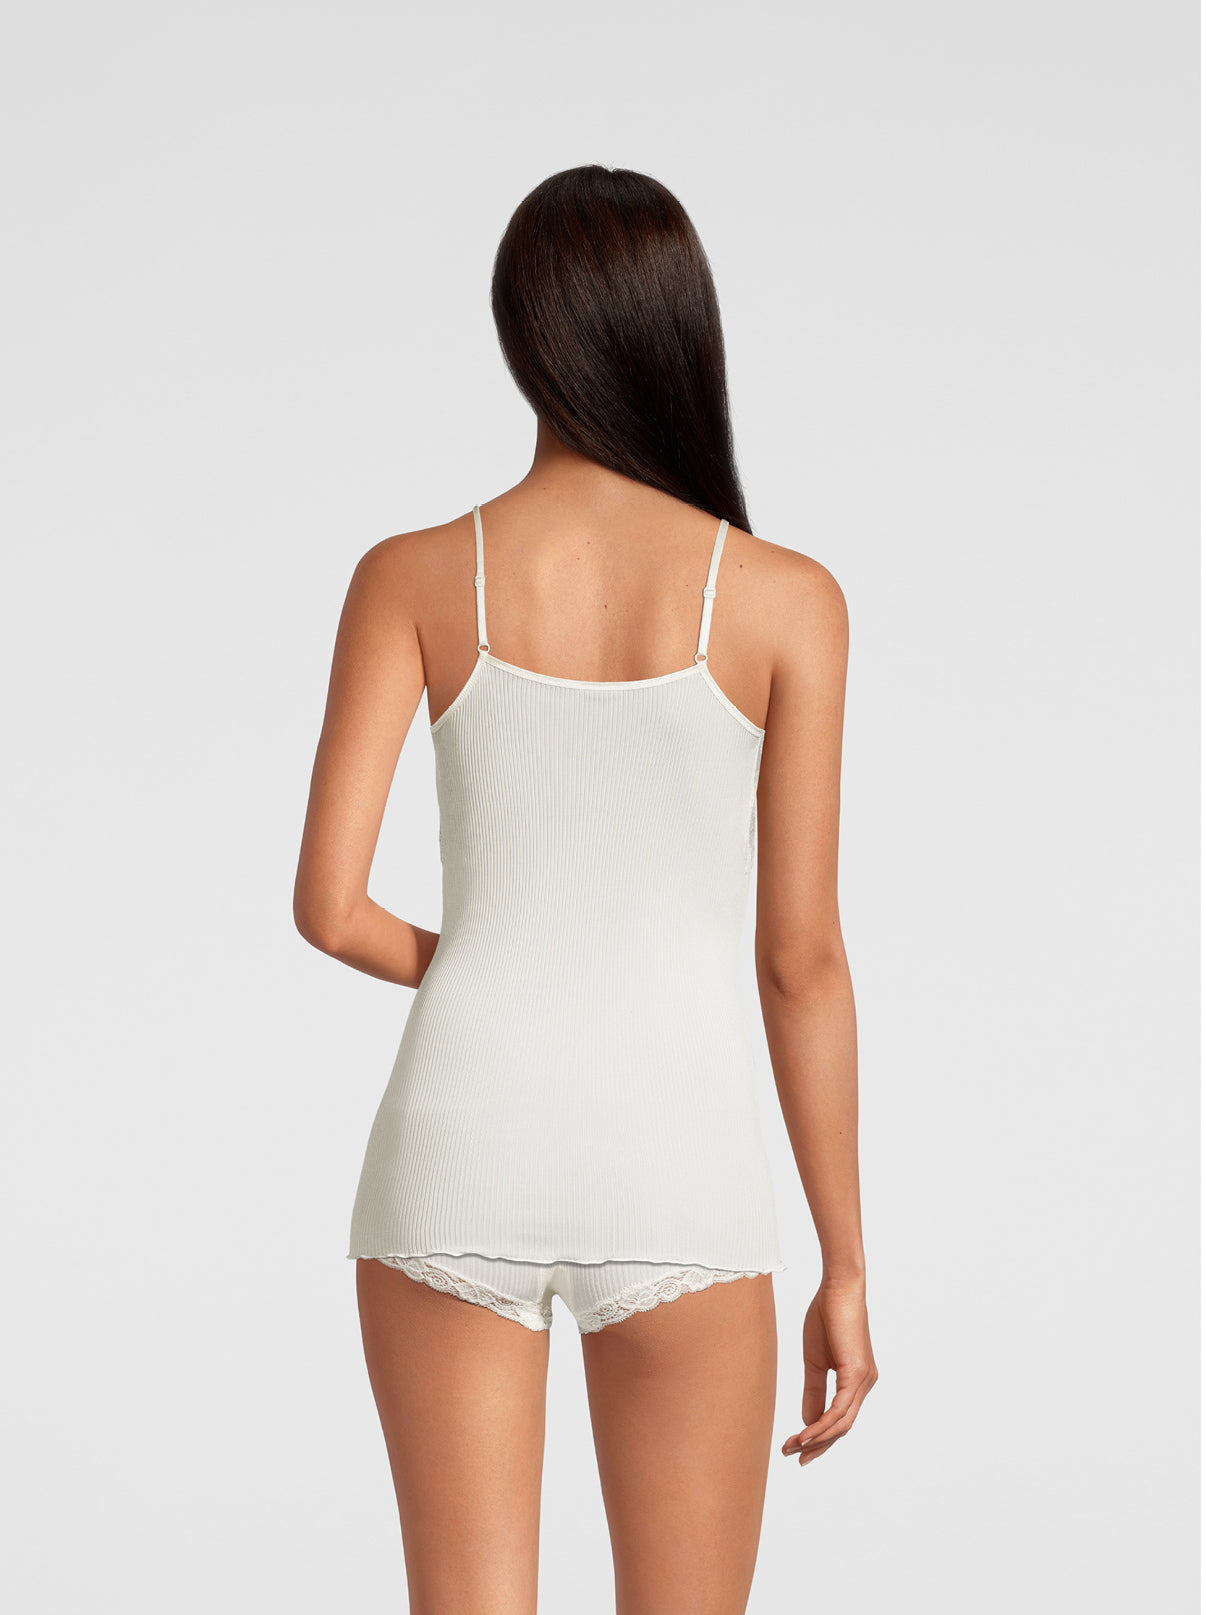 Off-white silk halterneck camisole with Leavers lace trim